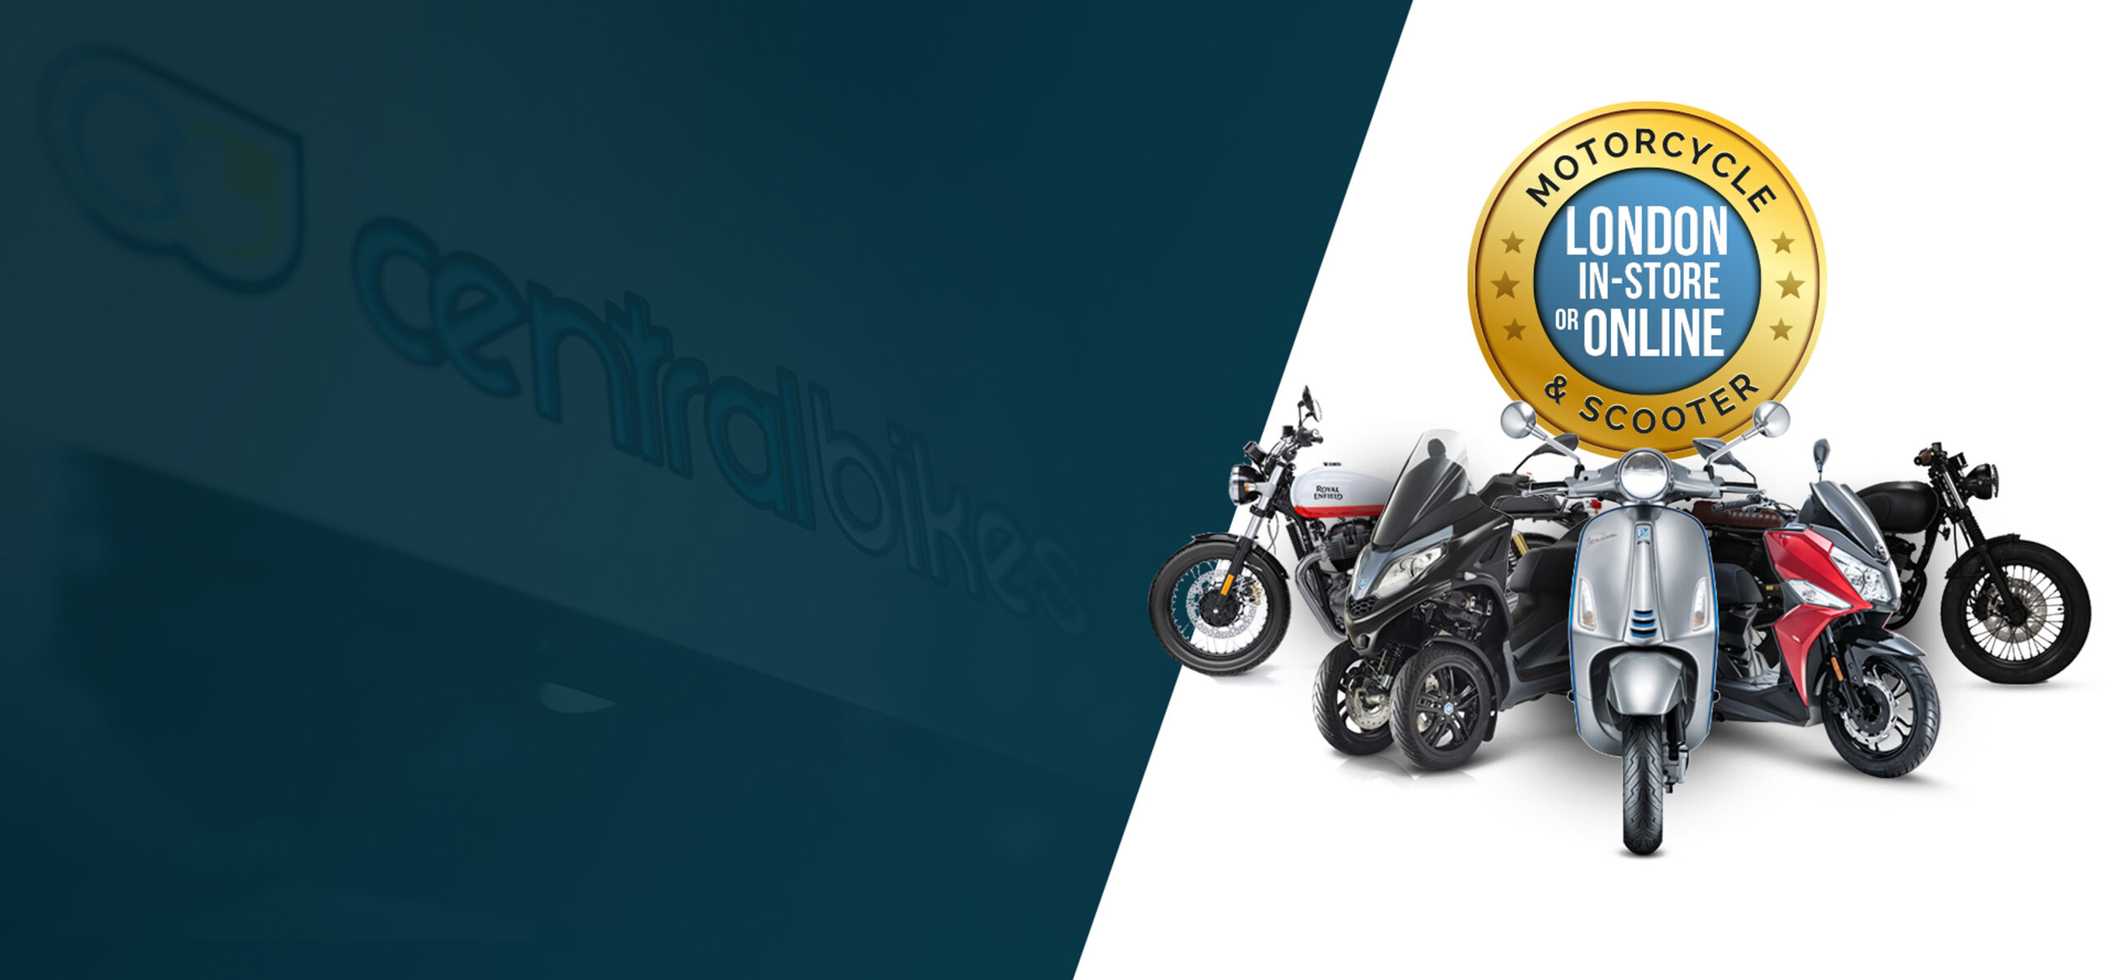 Central Bike is London first fully online eCommerce store with Piaggio, Vespa, Mutt Motorcycles, Royal Enfield, CF Moto and Motor Guzzi.